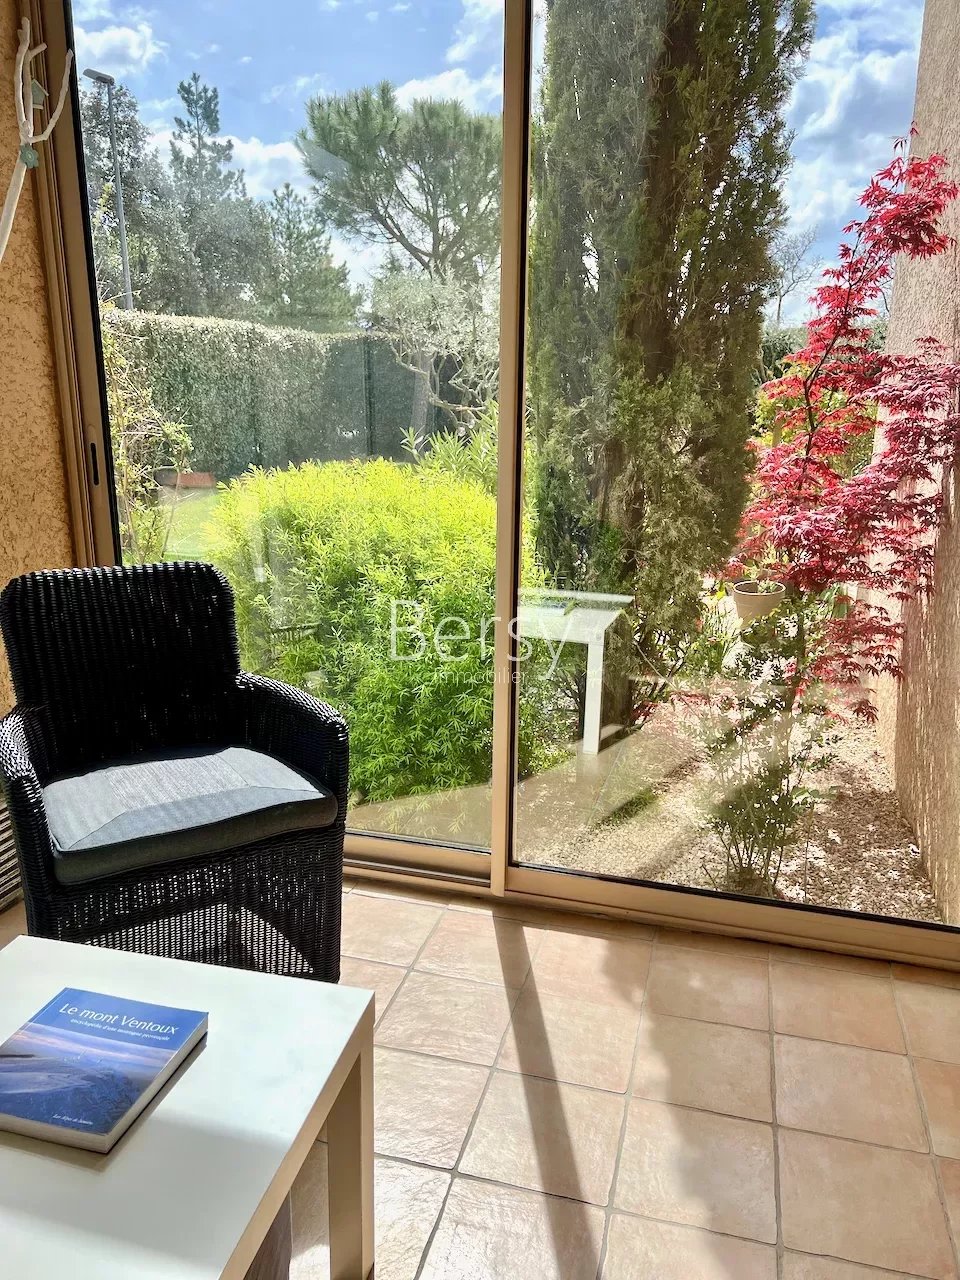 SOLE AGENT - 700 METERS FROM THE CENTER - SINGLE STOREY VILLA - 3 BEDROOMS - OUTBUILDINGS - LAND OF 1000m2 MAGNIFICENTLY SPORTED WITH OLIVE TREES - SWIMMING POOL